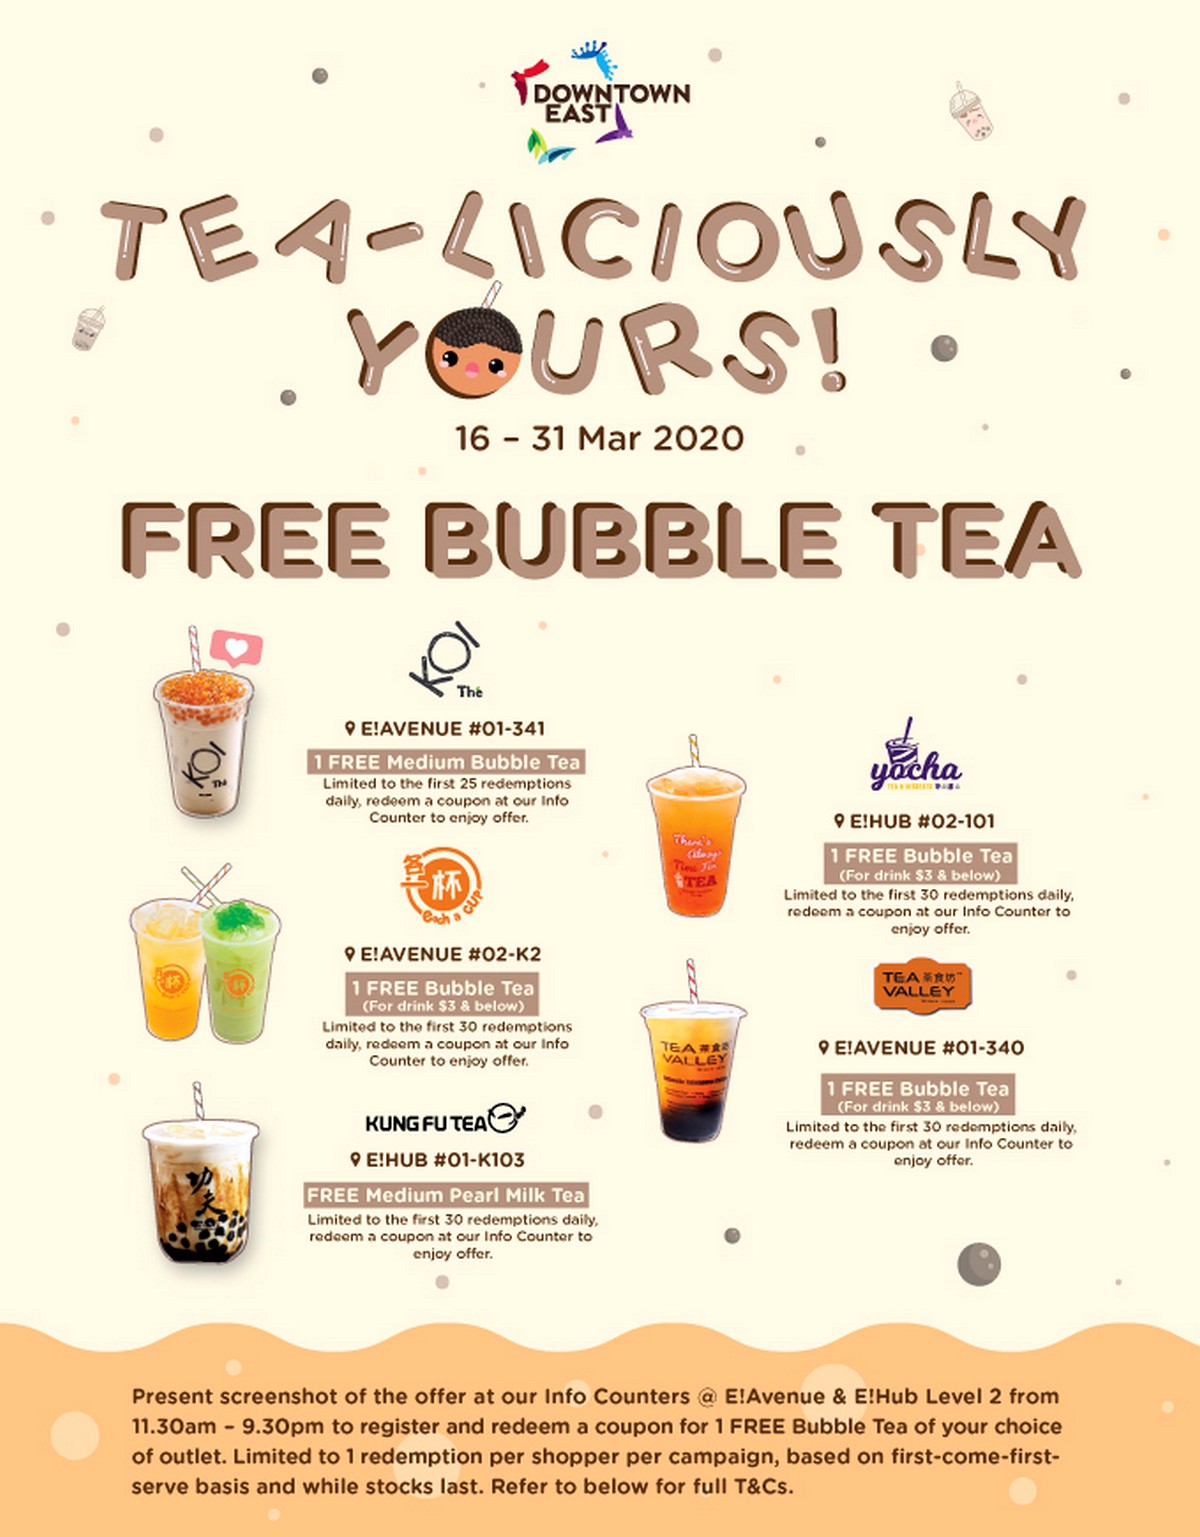 Downtown-East-Free-Bubble-Tea-Promotion-2020-Giveaway-Freebies-2021-Discounts-Offers 16-31 Mar 2020: Downtown East FREE Bubble Tea Promotion! KOI The, Kung Fu Tea, Each A Cup, Tea Valley & Yocha!